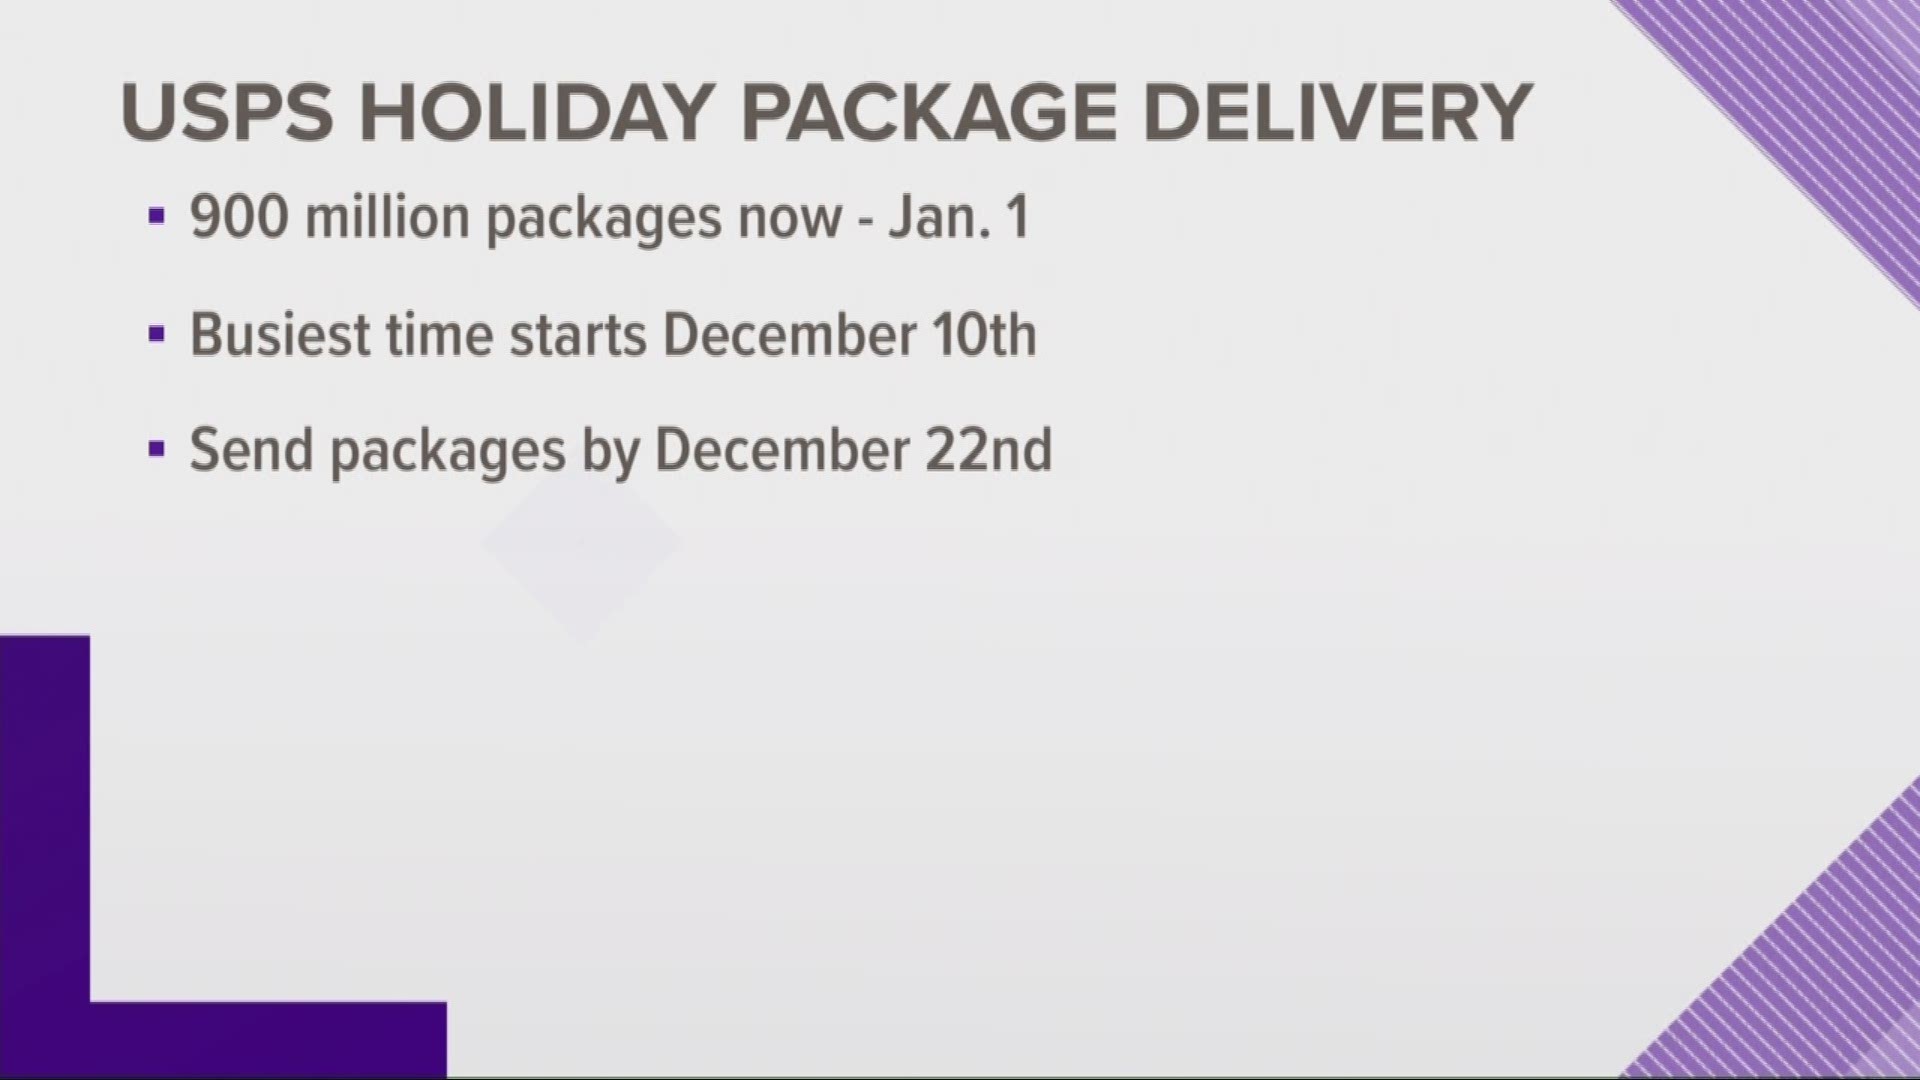 The United States Postal Services is expecting to deliver over 900 million package deliveries this holiday season.